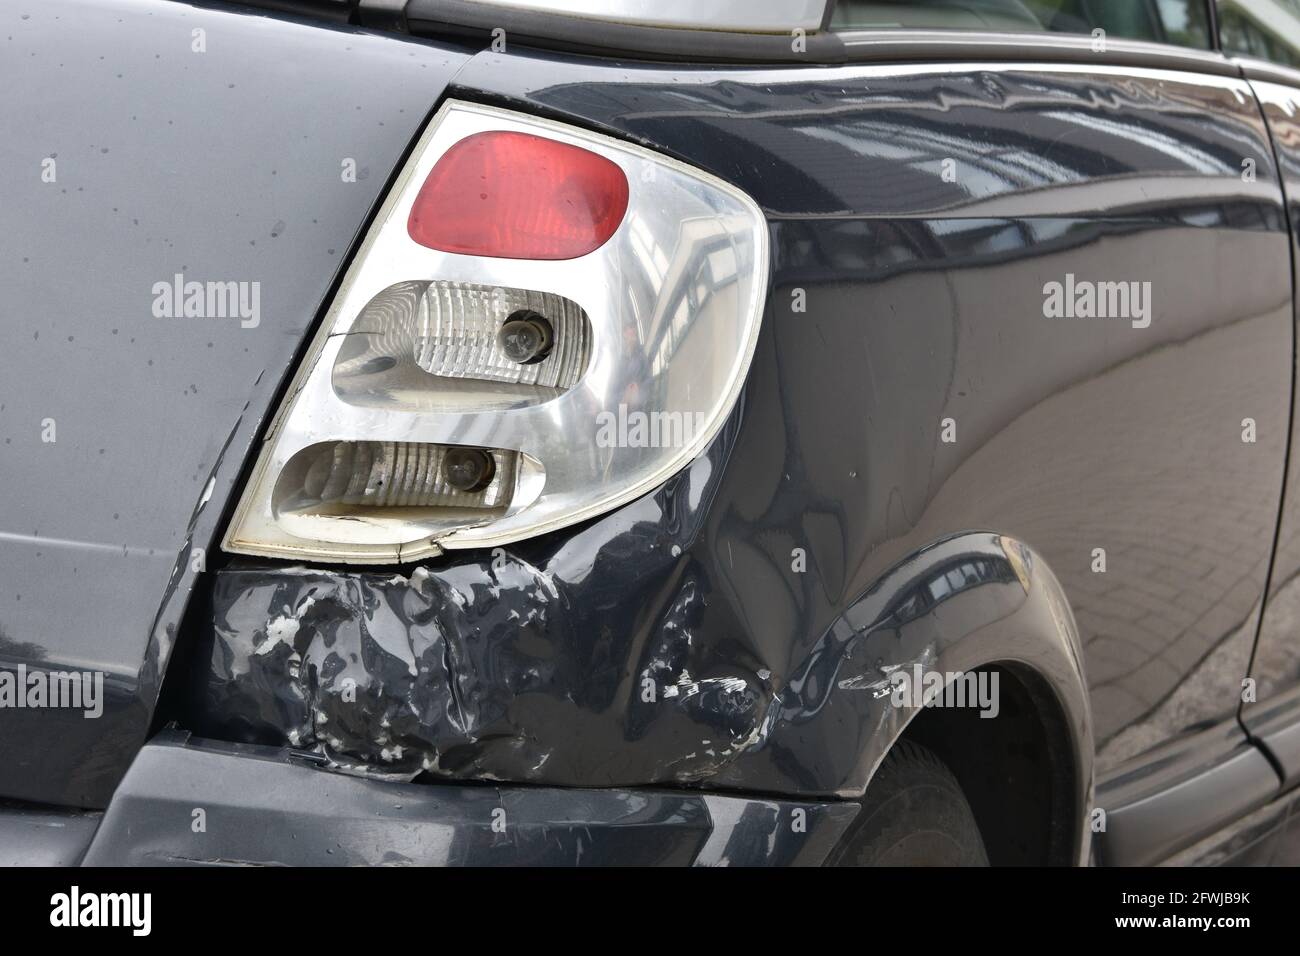 Car damages in rear part of the vehicle close up. Stock Photo